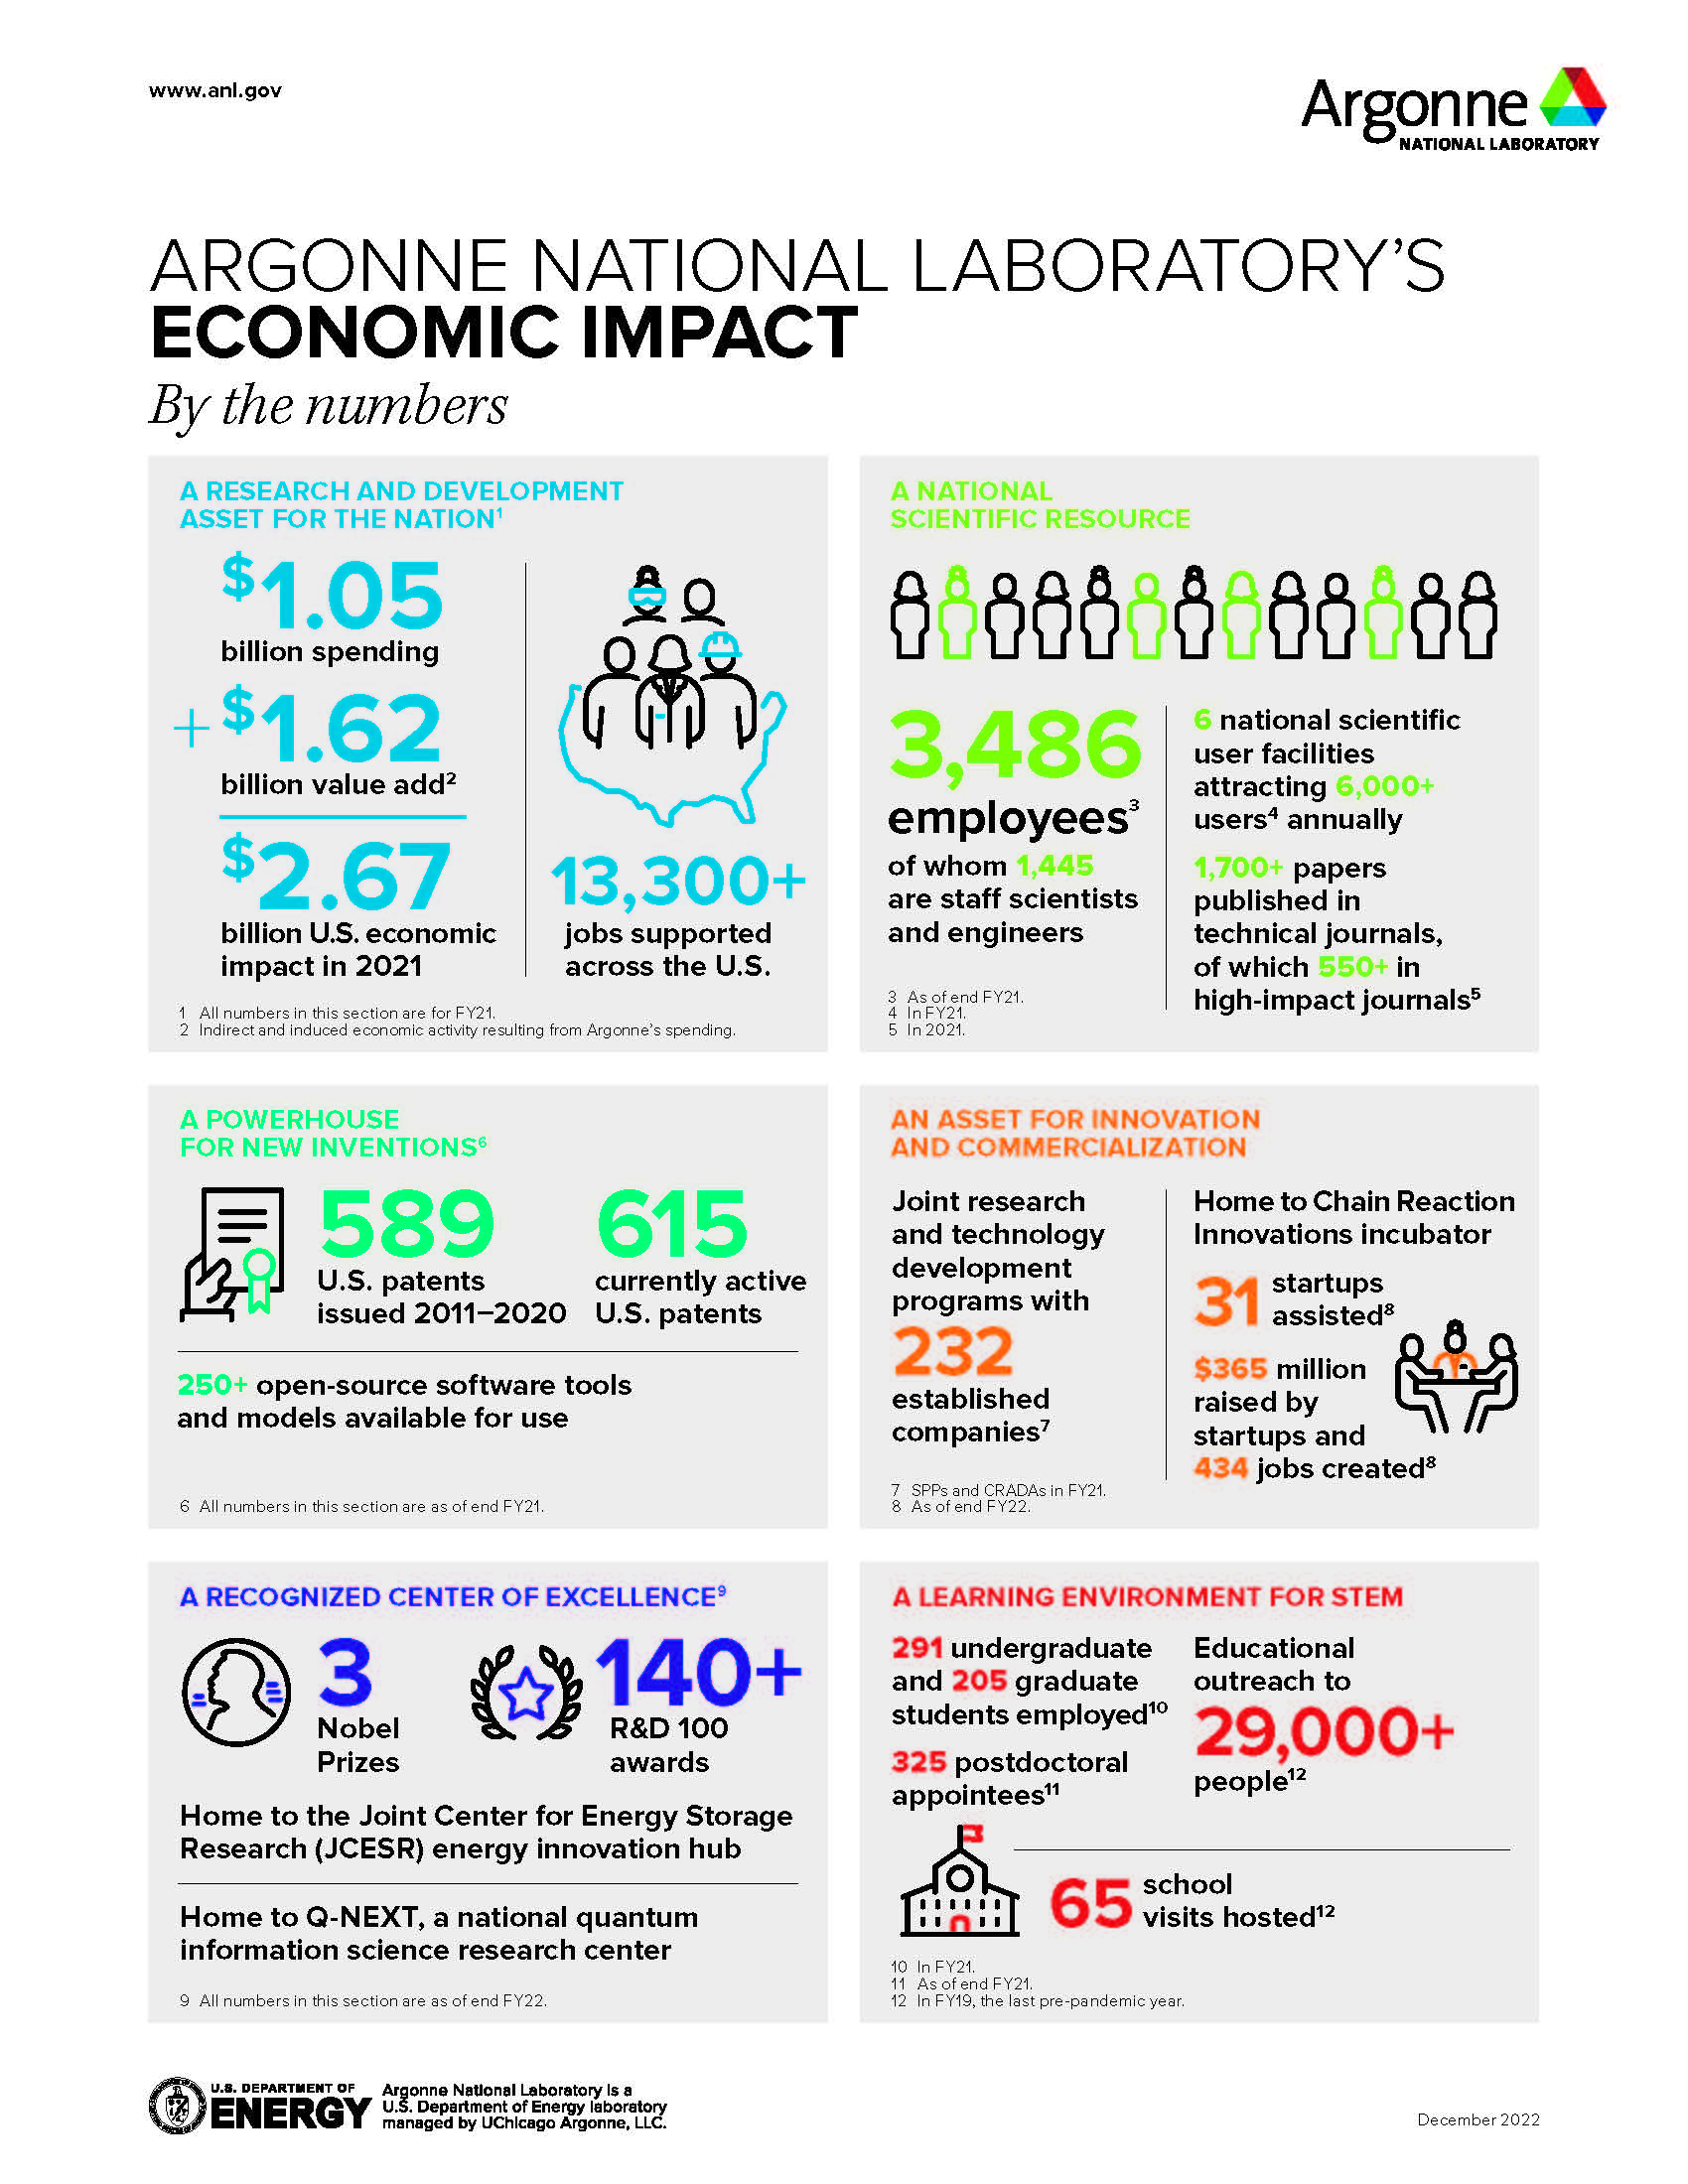 A multi-colored factsheet with images and text about the economic impact of Argonne National Laboratory